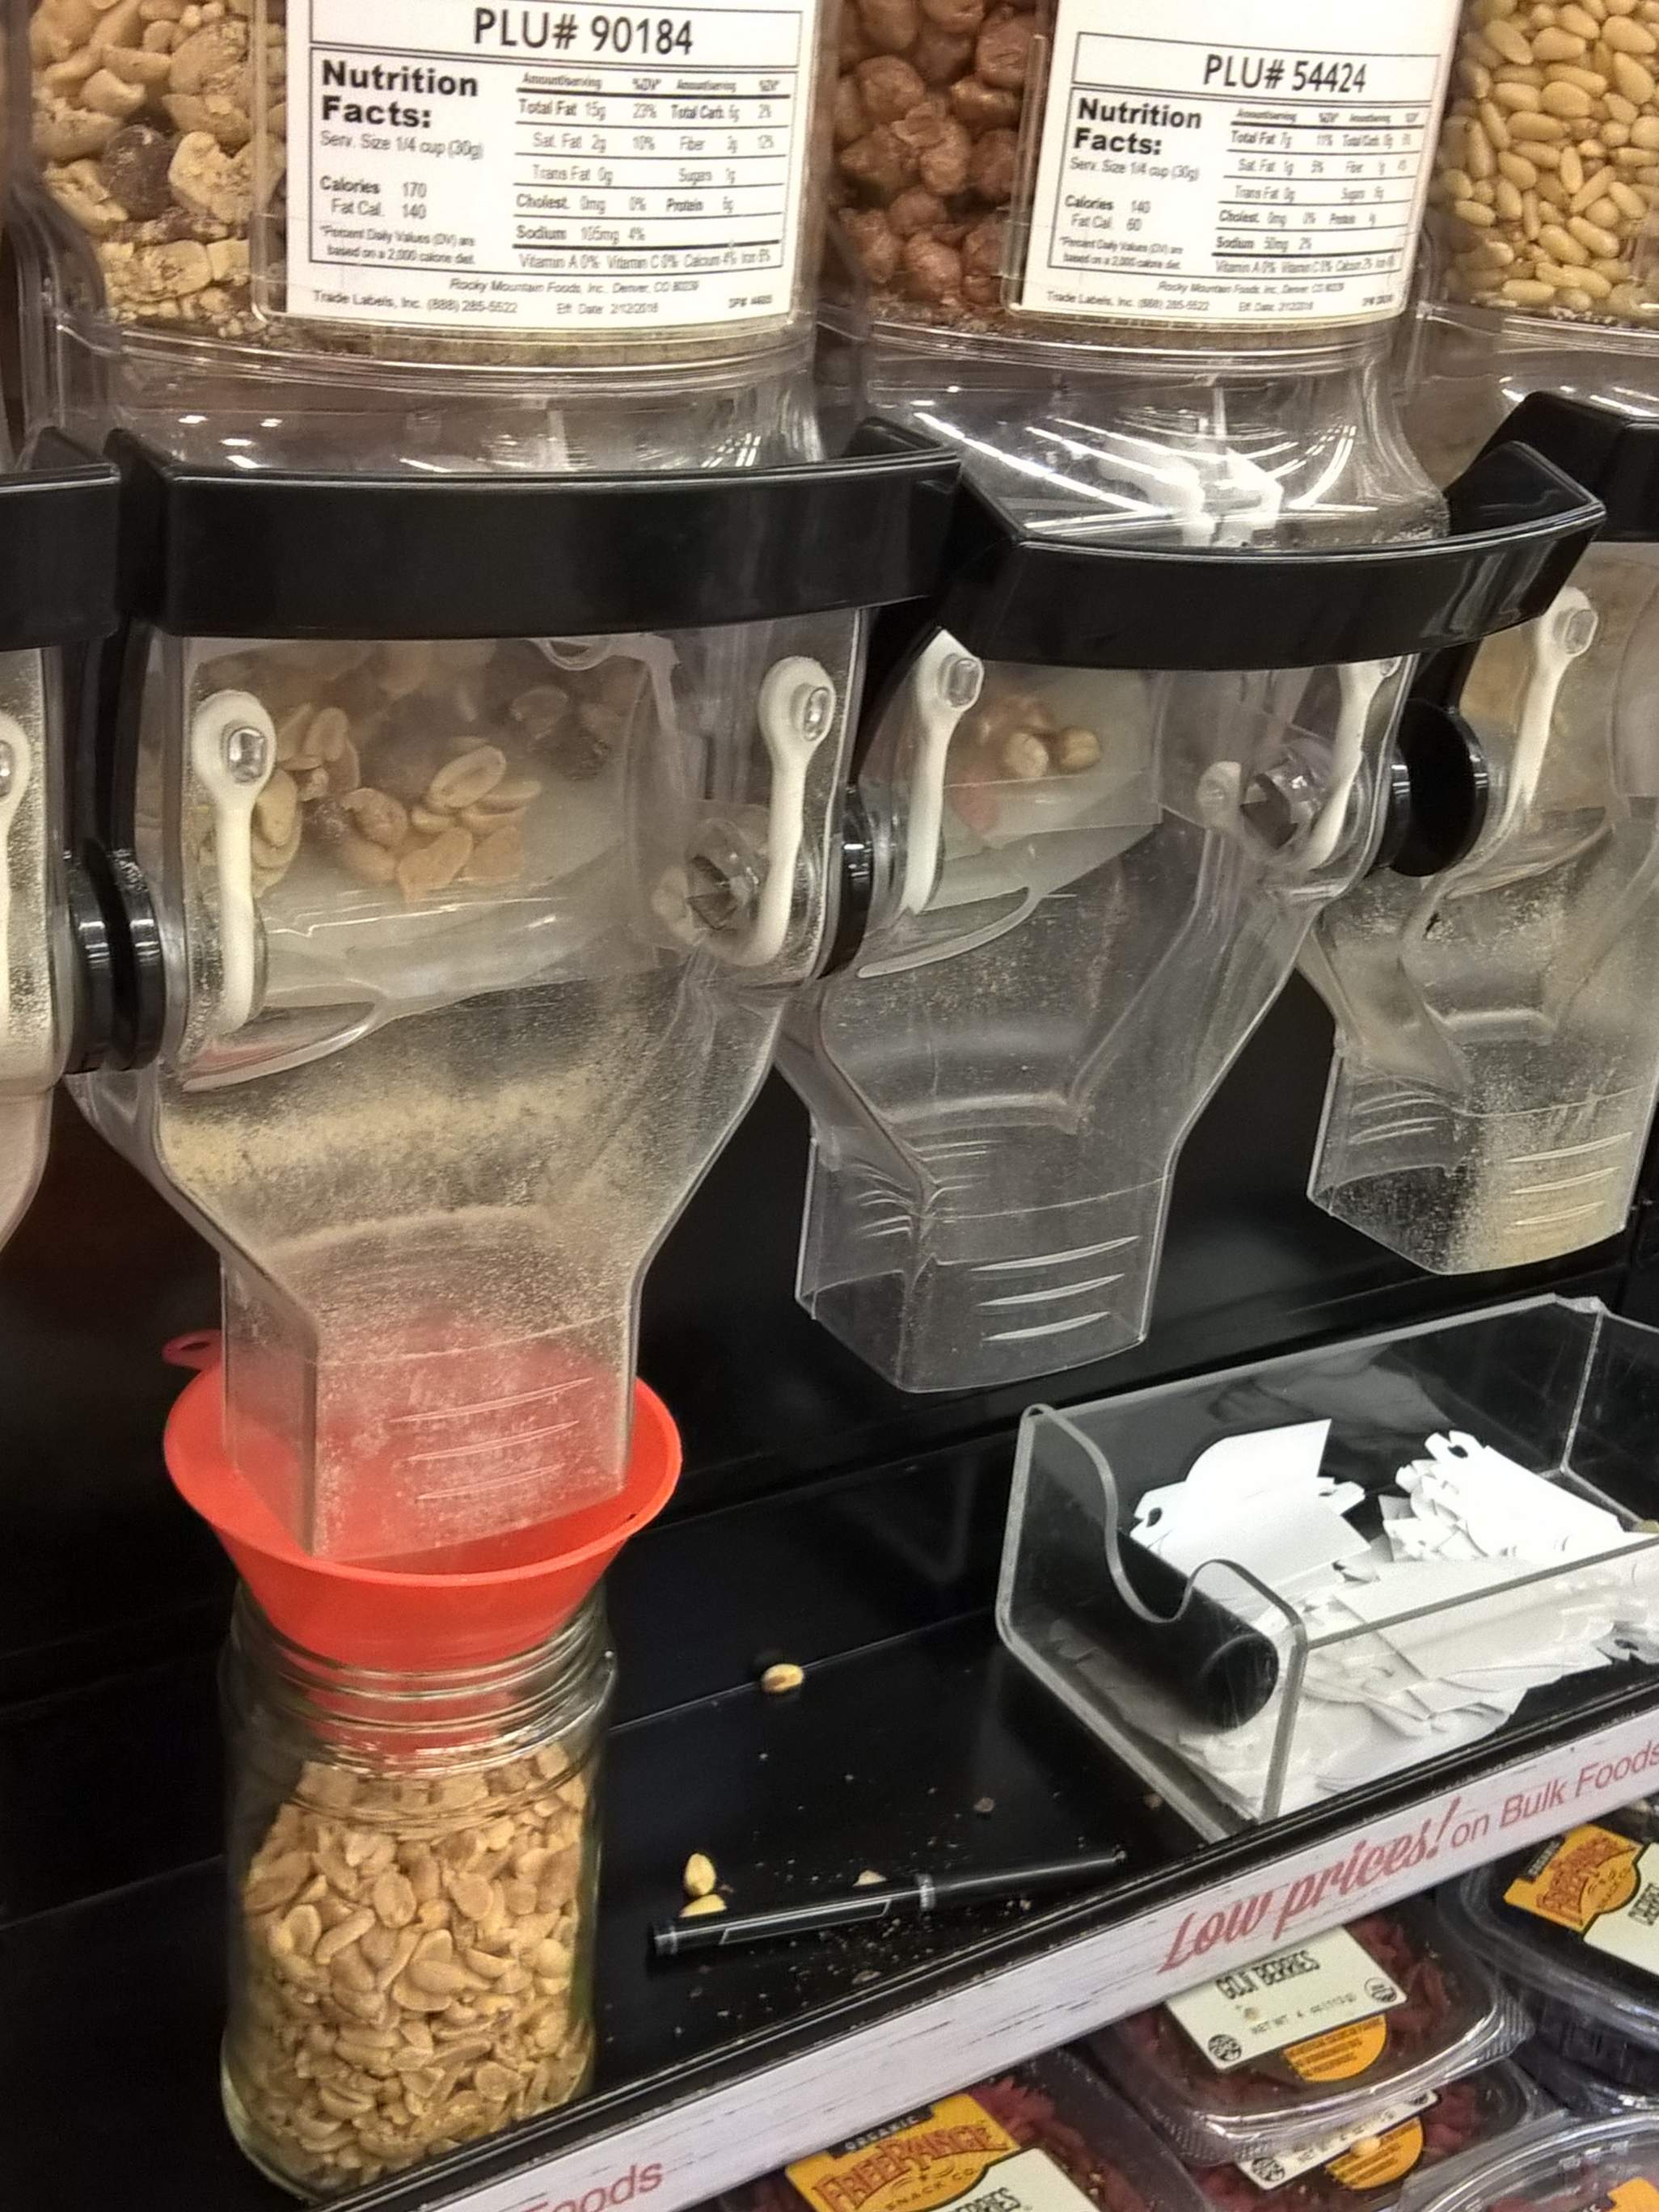 You can fill your own jars in the bulk sections of King Soopers. In this photo, I used an orange funnel I brought, but the funnel is unnecessary and I no longer bring one.